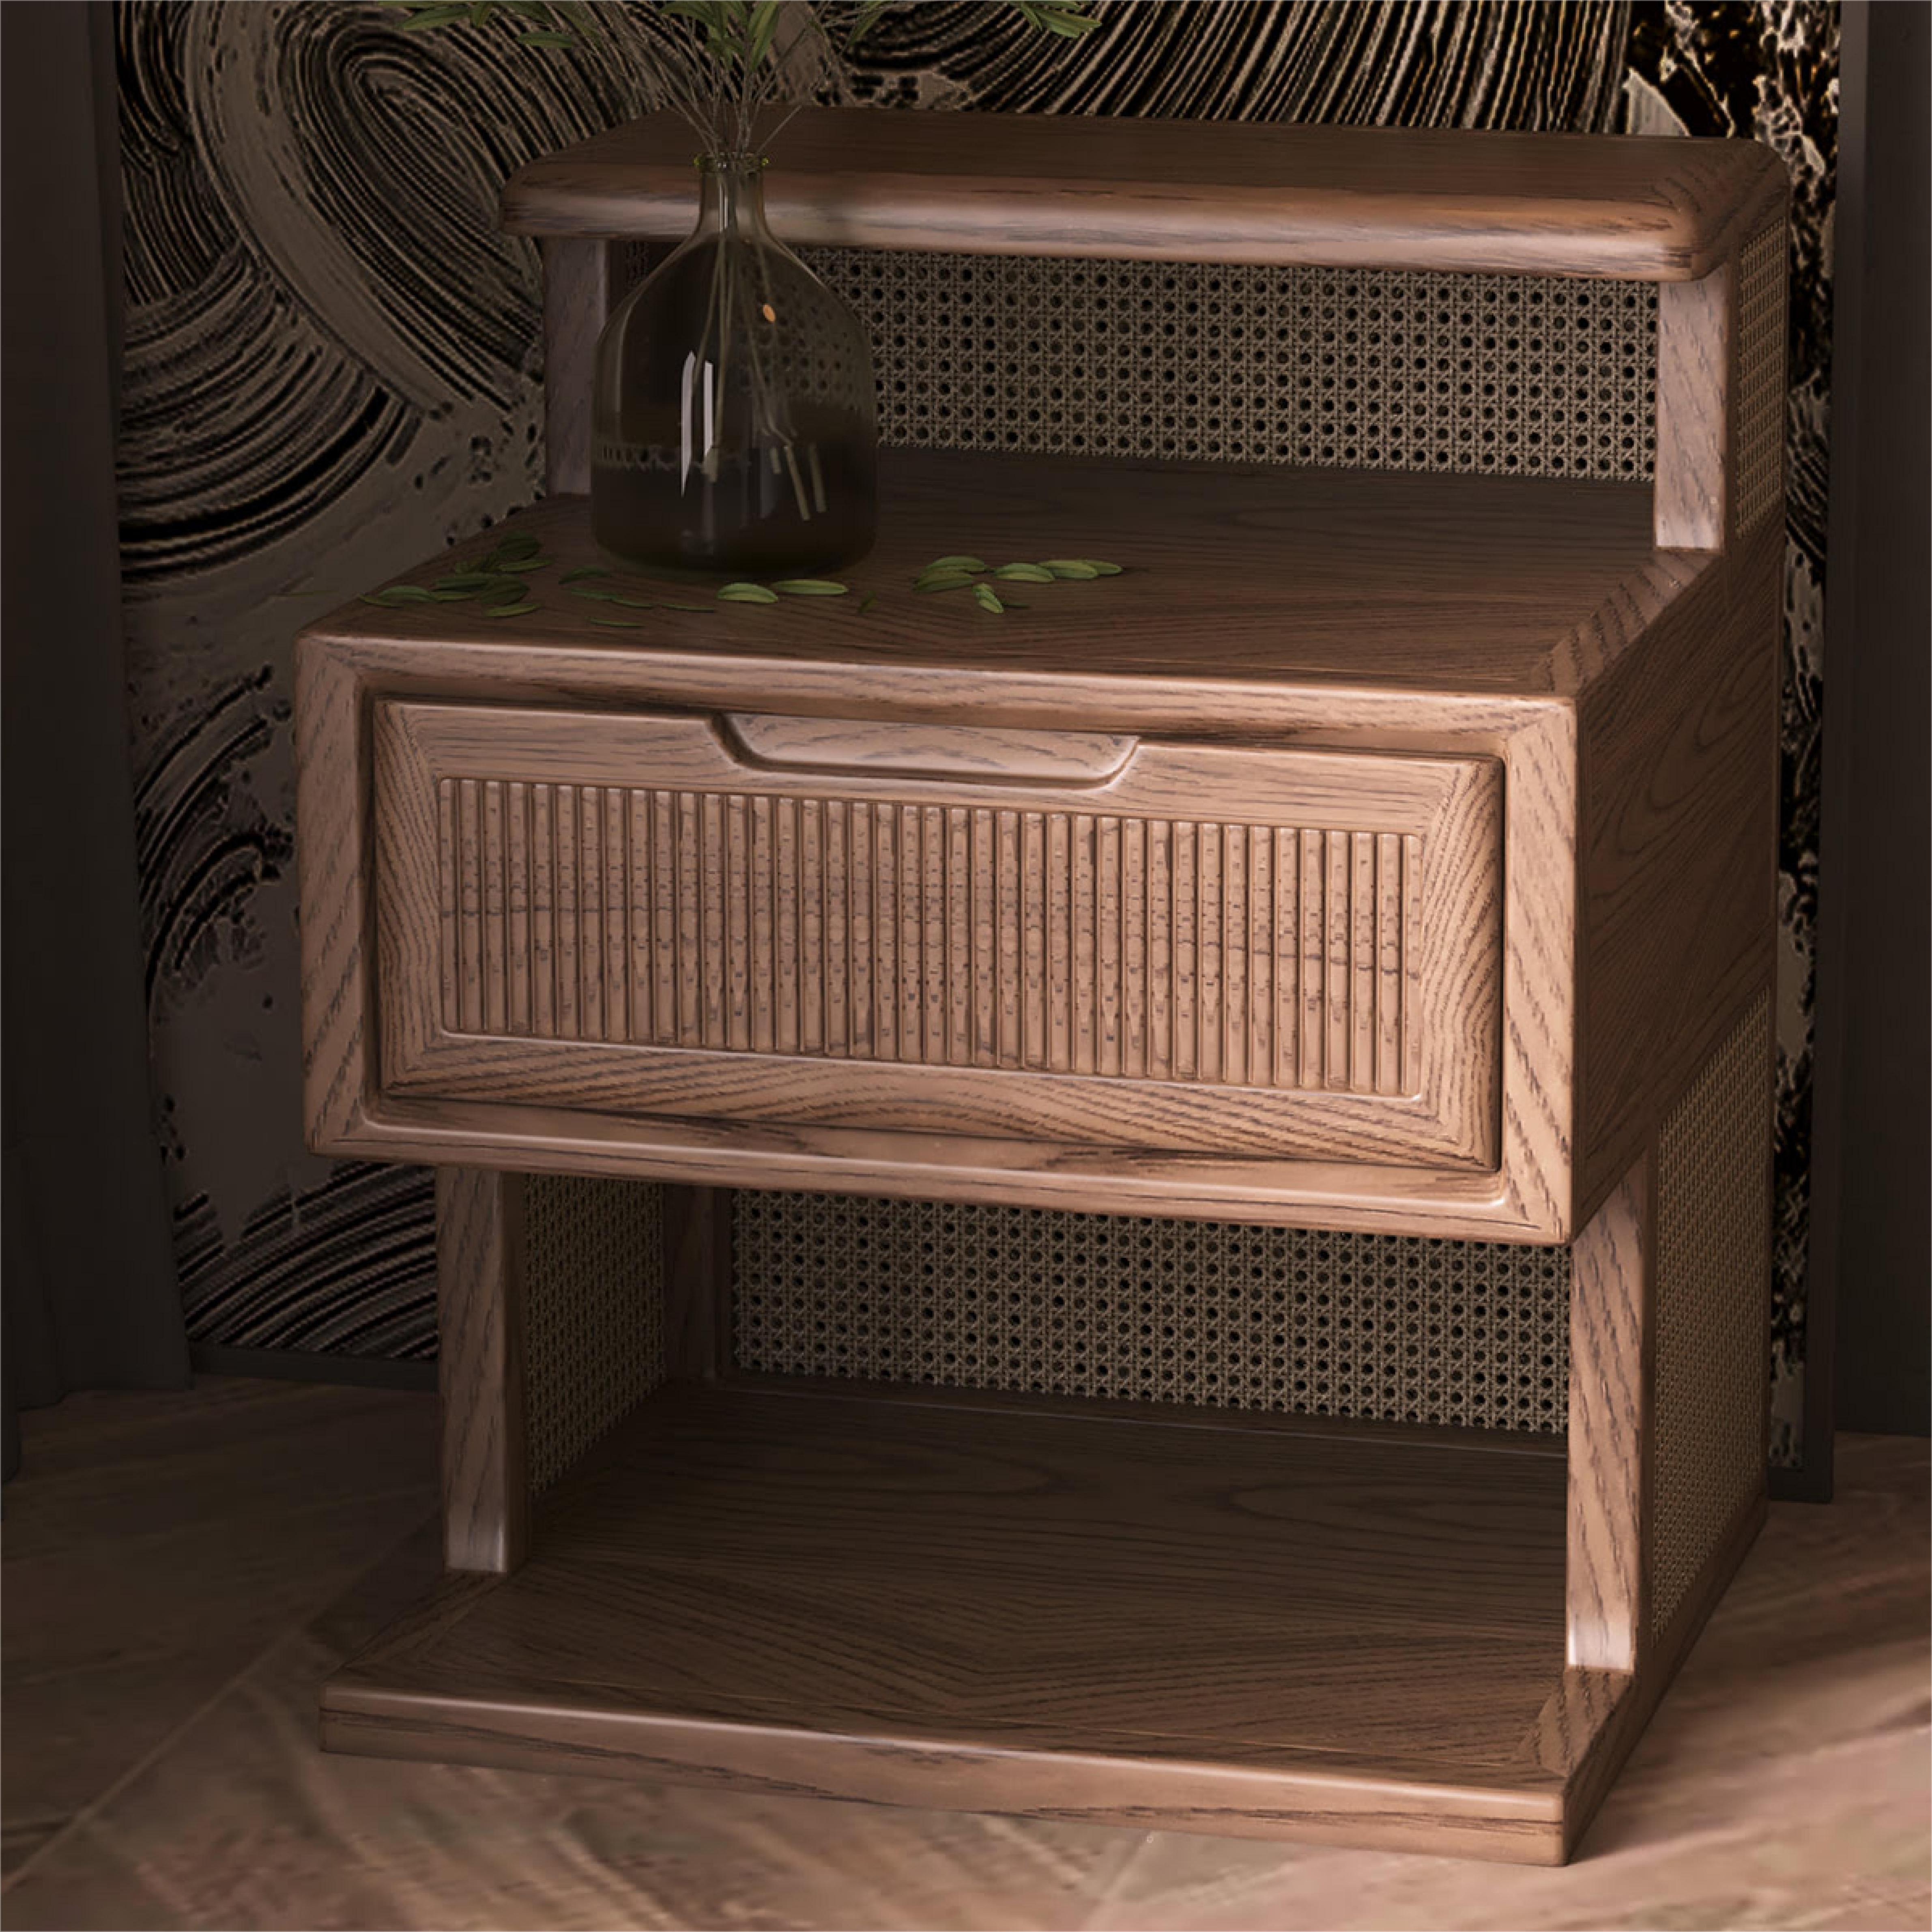 TBG-W02-3 solid wood rattan bedroom furniture set night stand night table bed side table unique modern natrual solid wood rattan bedroom furniture night stand night table  night stand,night table,side table,side cabient,bed side table